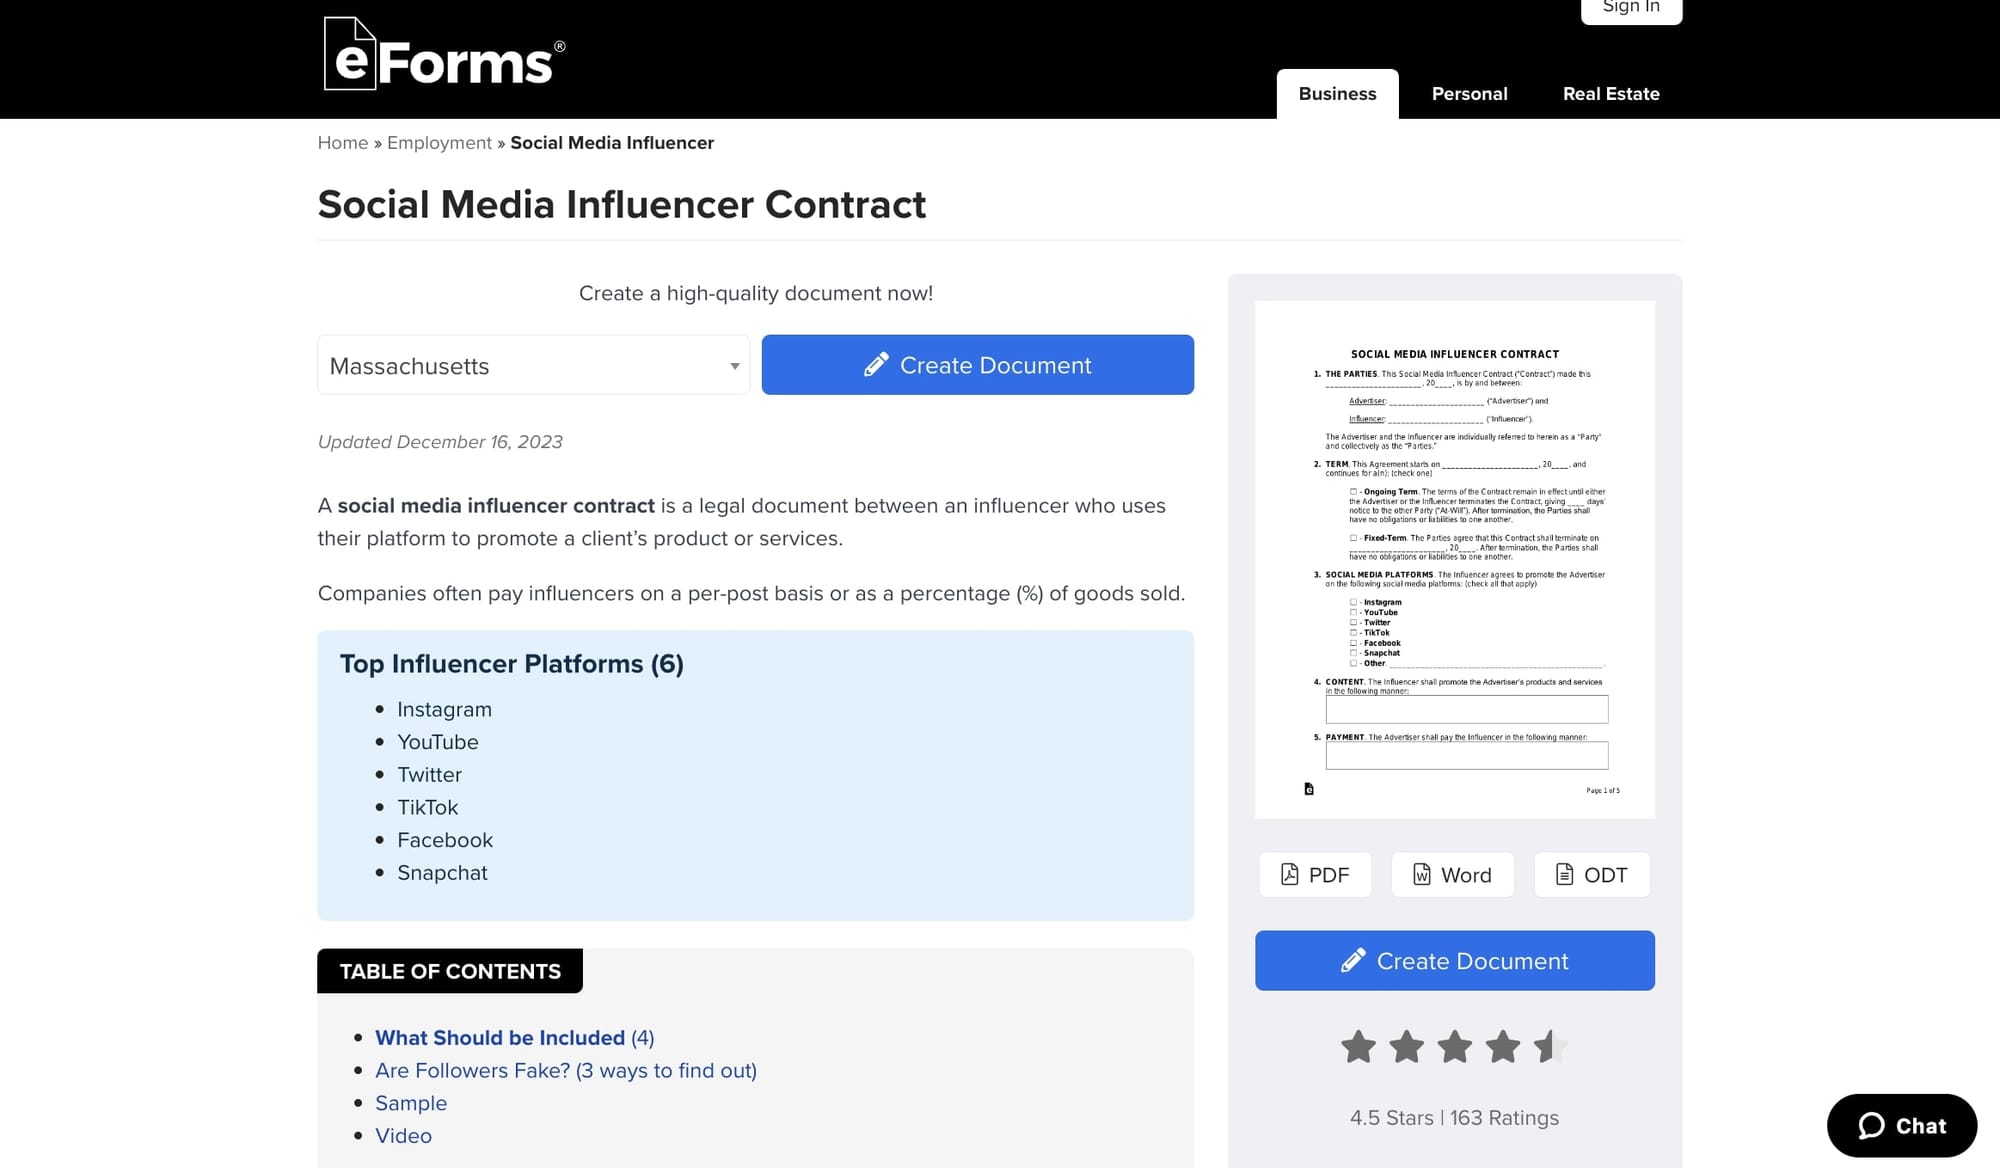 Influencer marketing agreement template by eForms